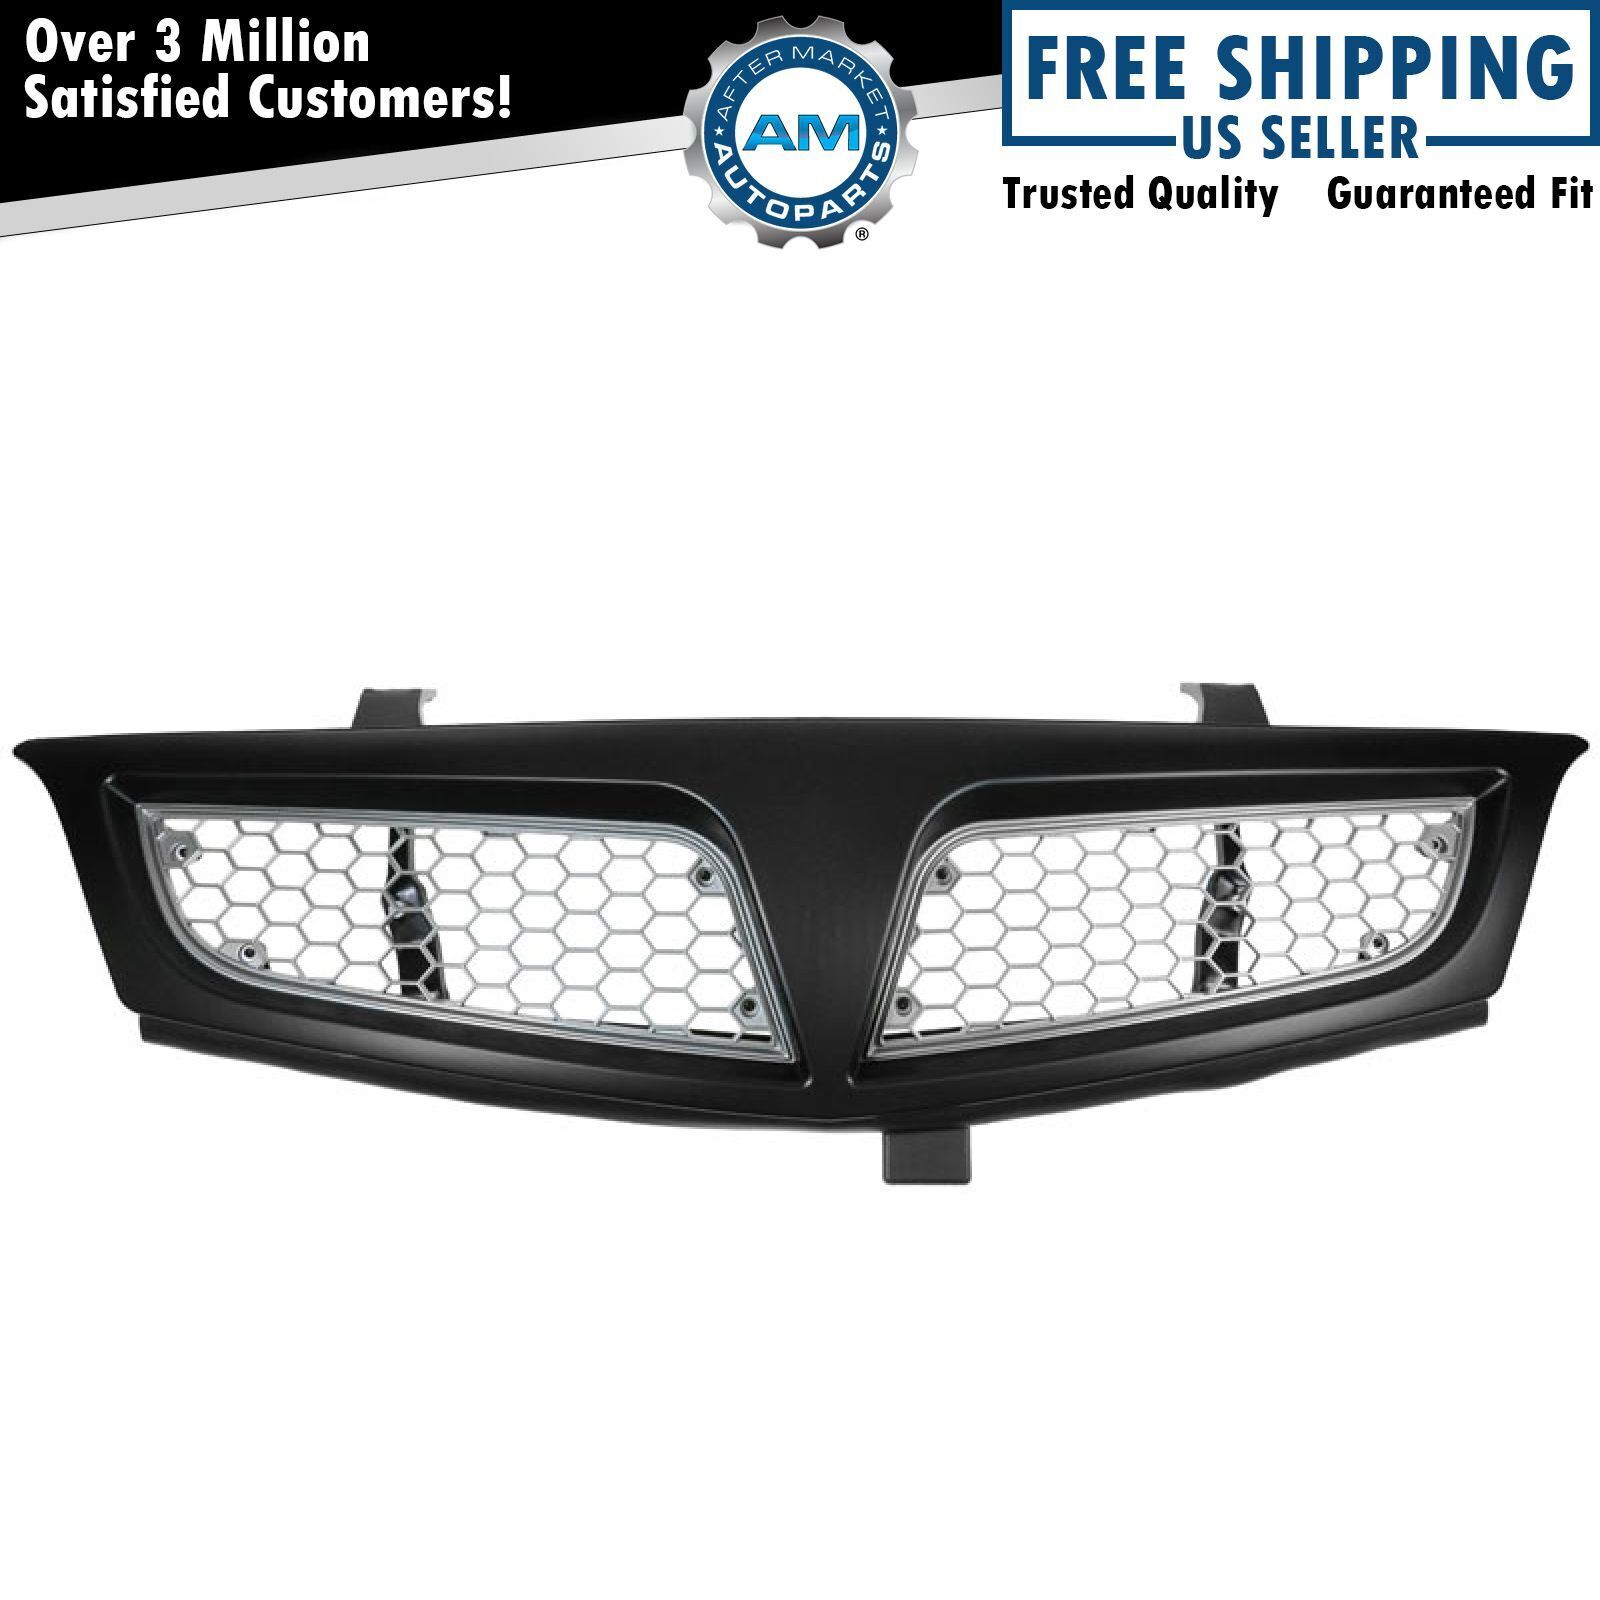 Silver & Black Front End Grille Grill for 01-05 Pontiac Montana